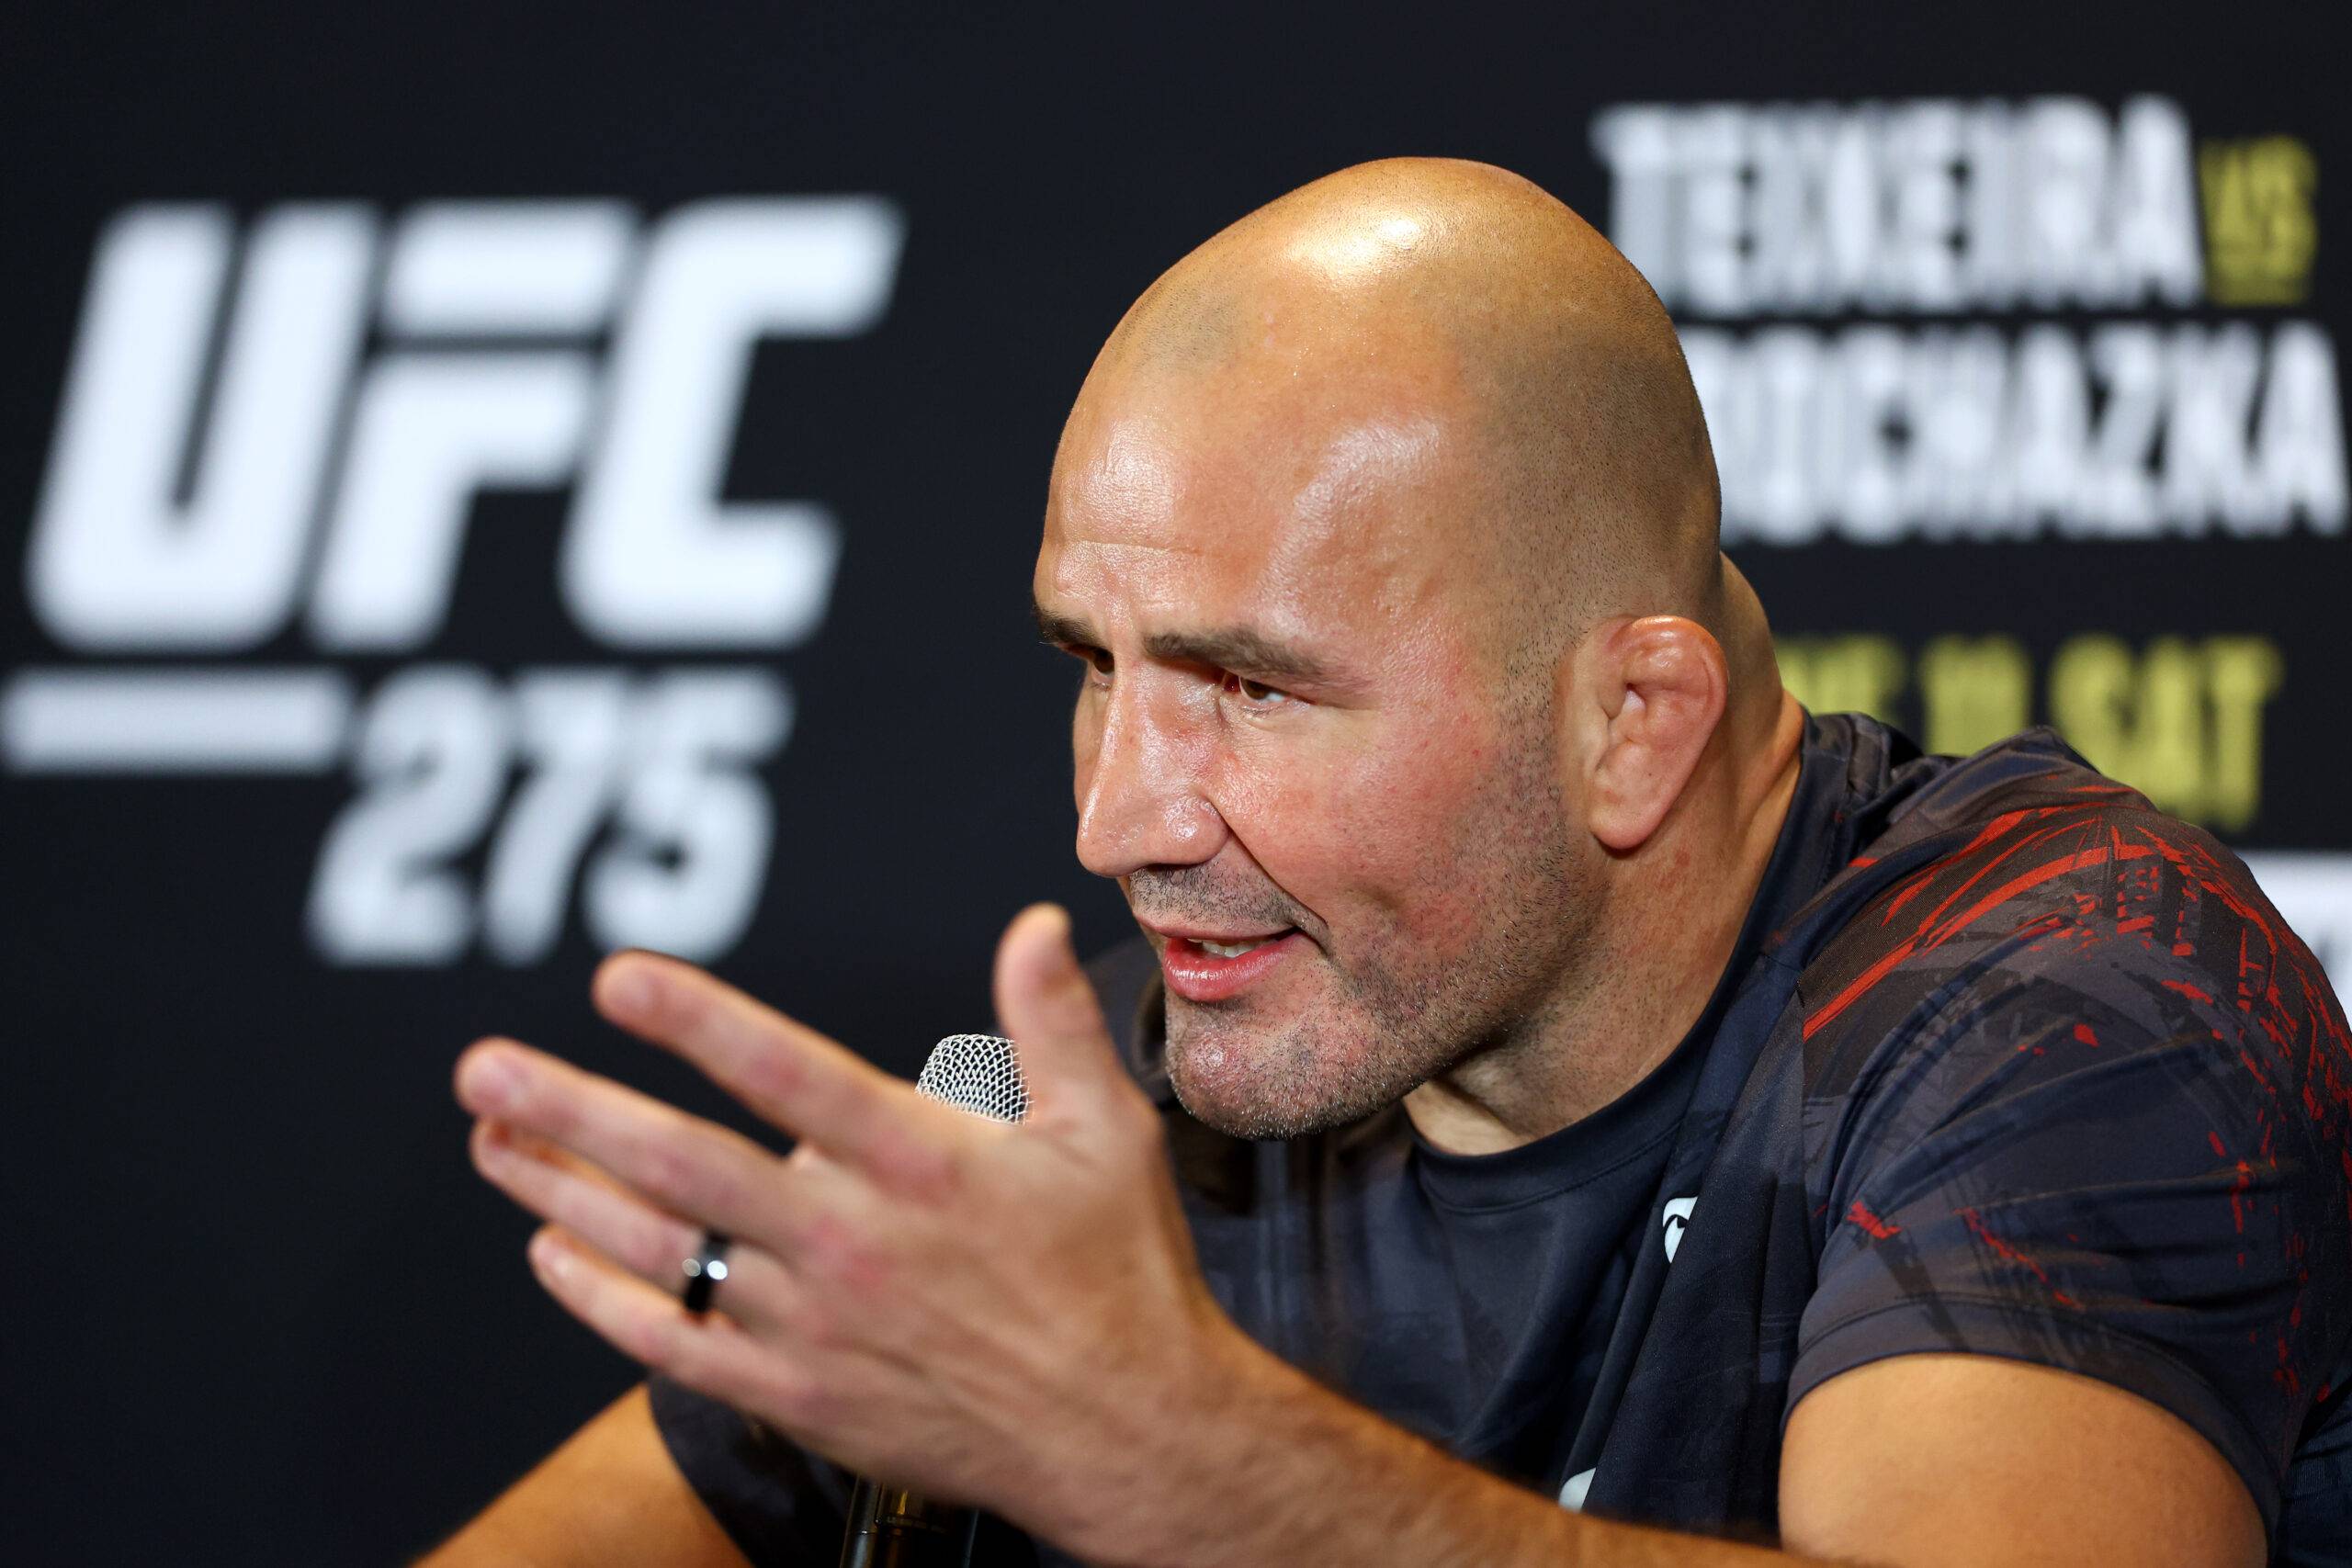 Glover Teixeira isn't happy with the UFC's decision to book Jan Blachowicz vs Magomed Ankalaev for the vacant light heavyweight title